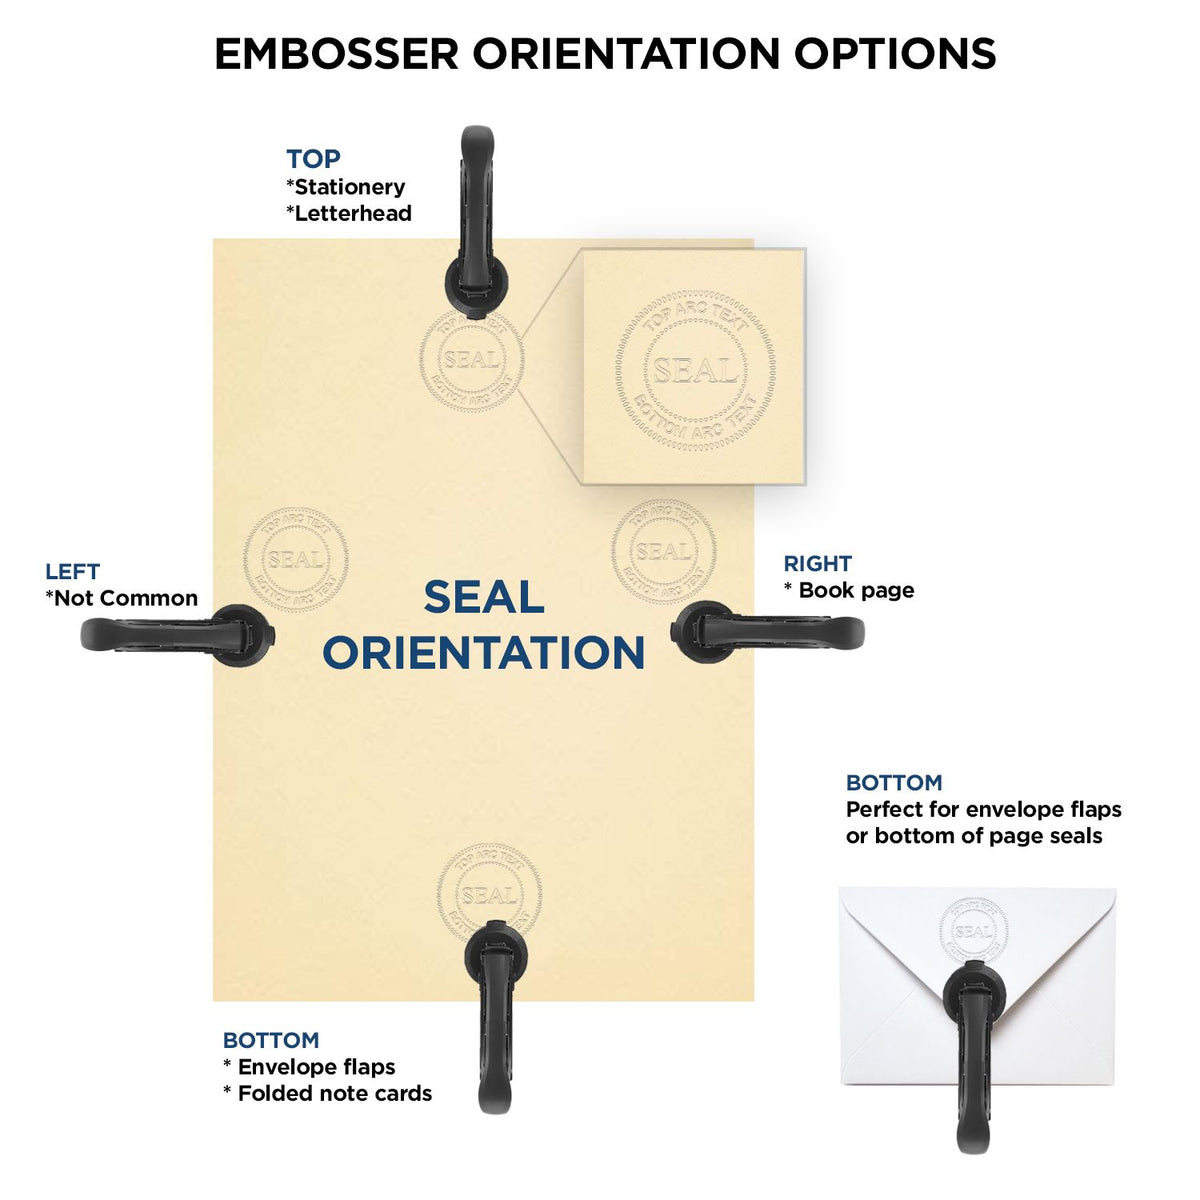 An infographic for the Gift Washington Land Surveyor Seal showing embosser orientation, this is showing examples of a top, bottom, right and left insert.